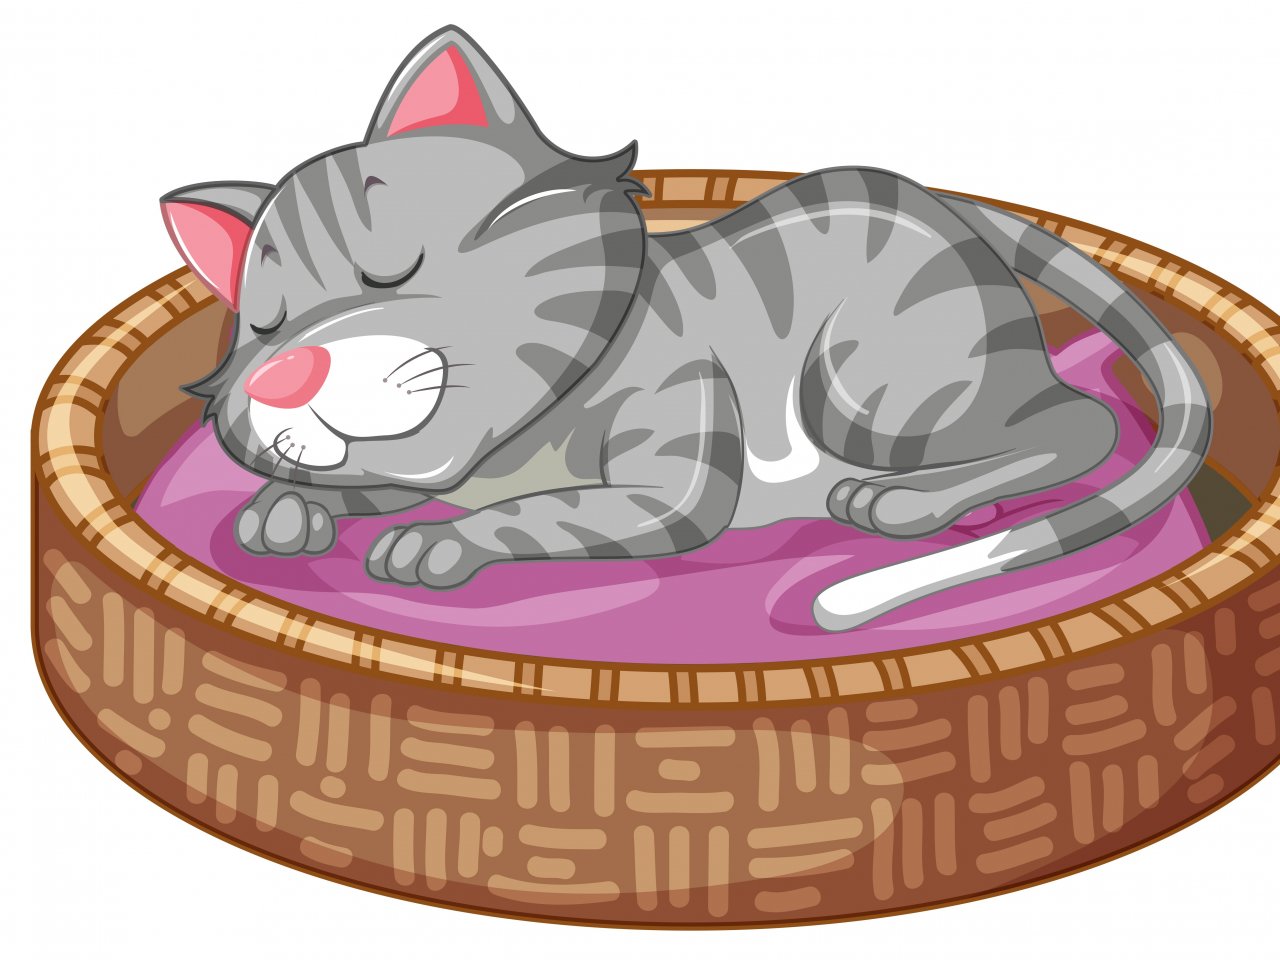 In a Cat Bed Online Jigsaw Puzzle